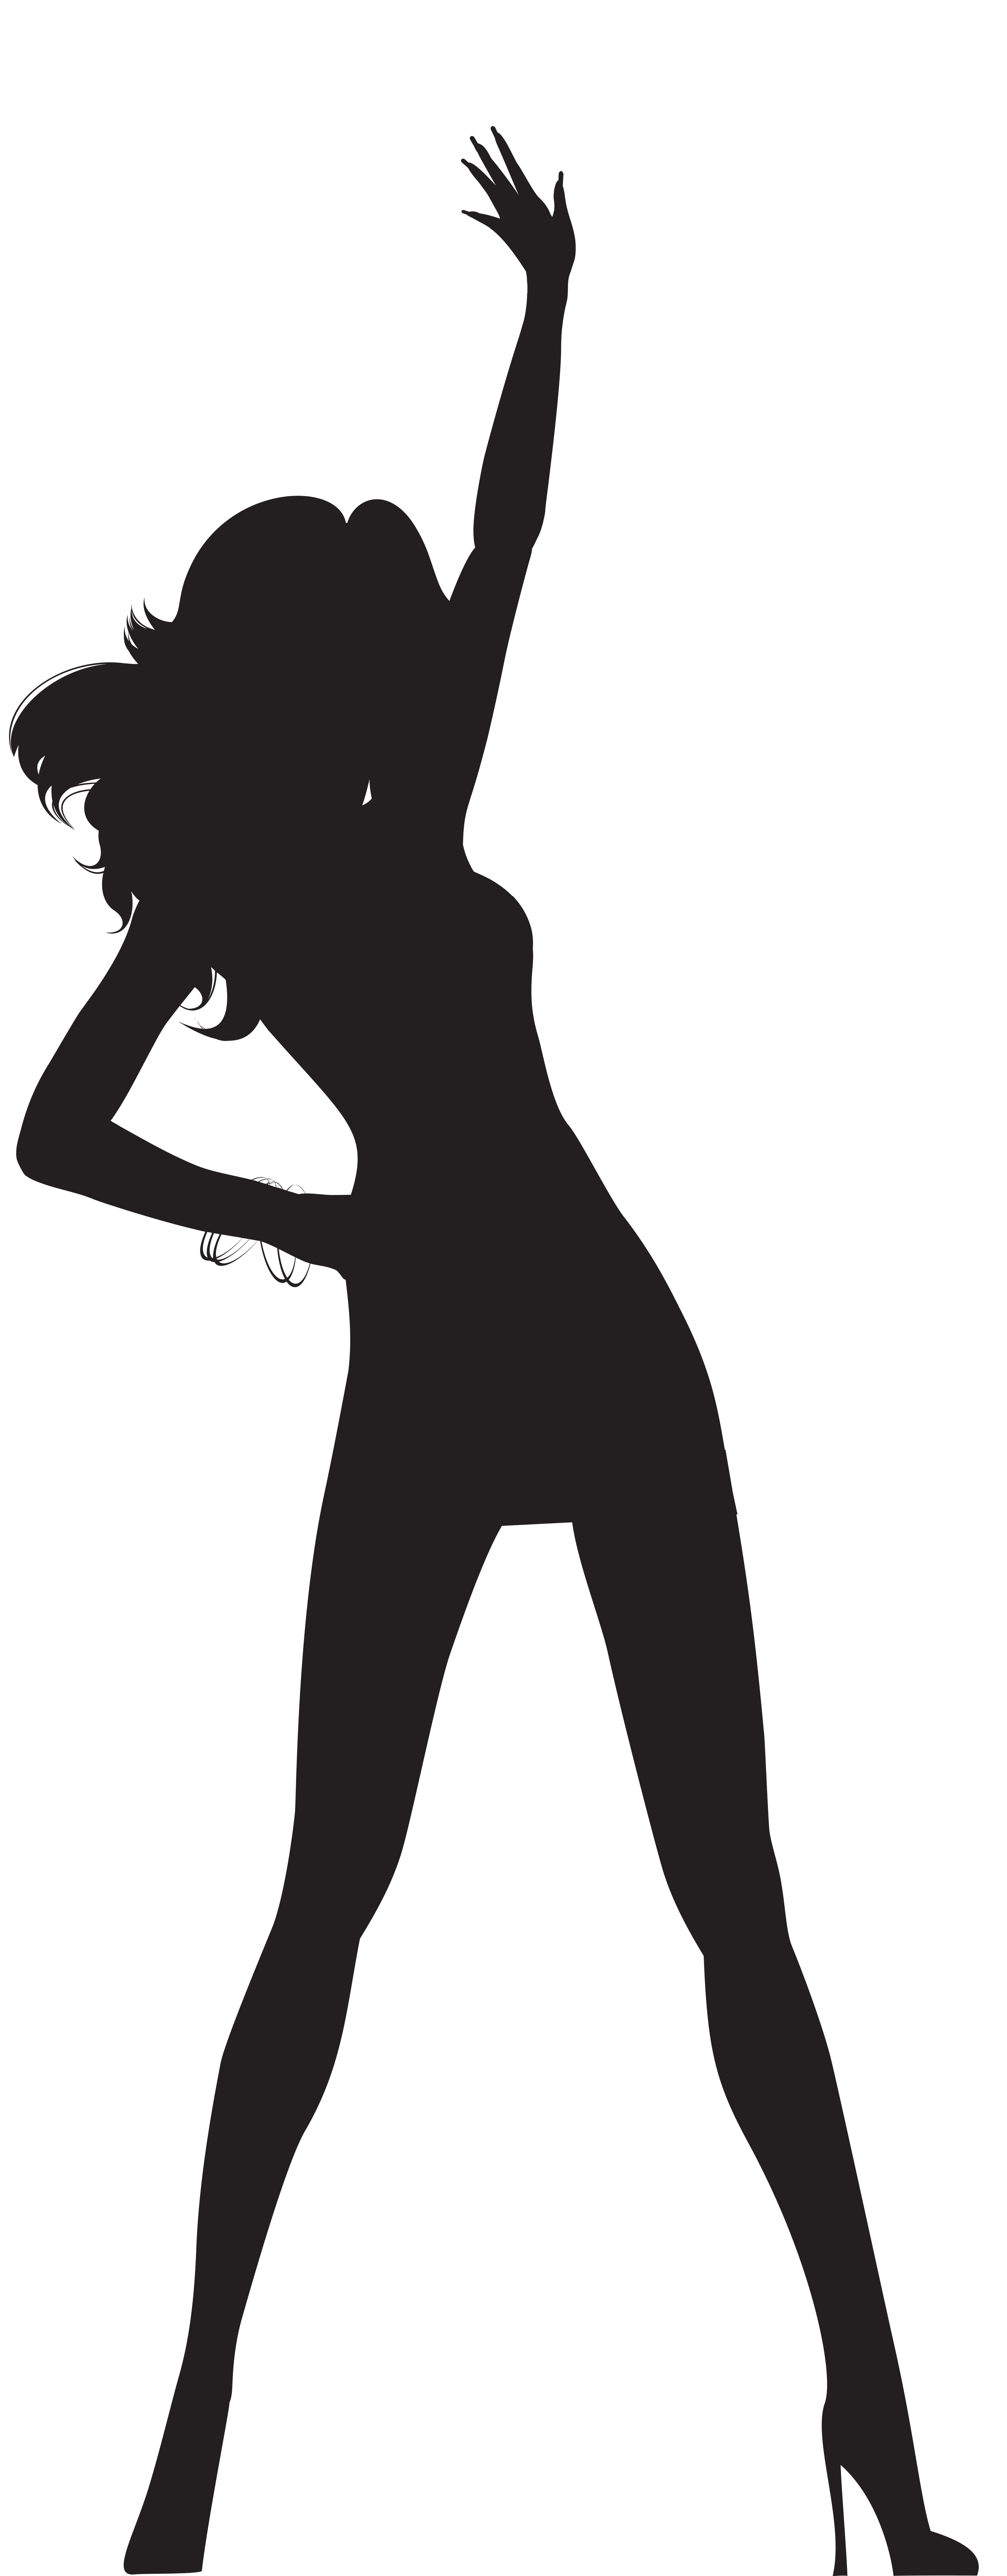 Fashion pose girl silhouette - Transparent PNG & SVG 